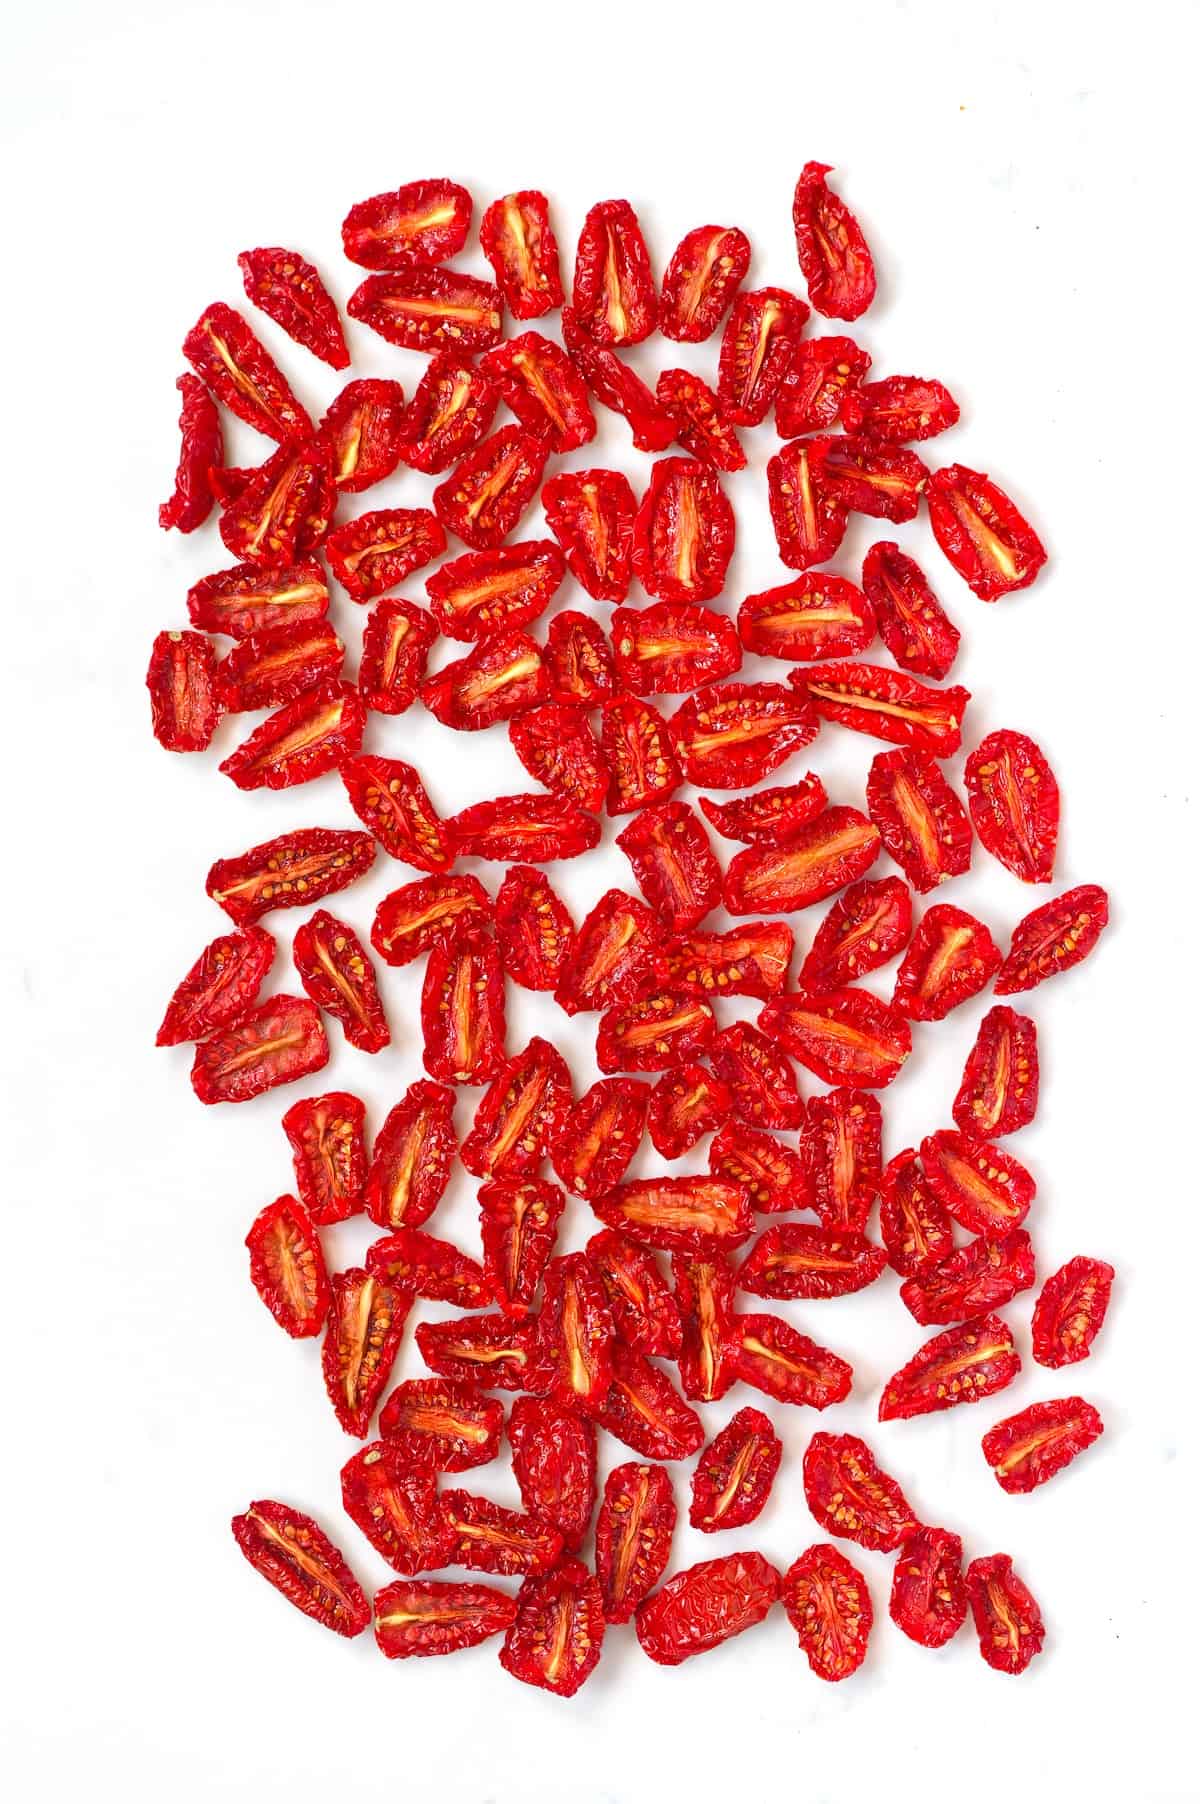 Sun dried tomatoes on a white surface